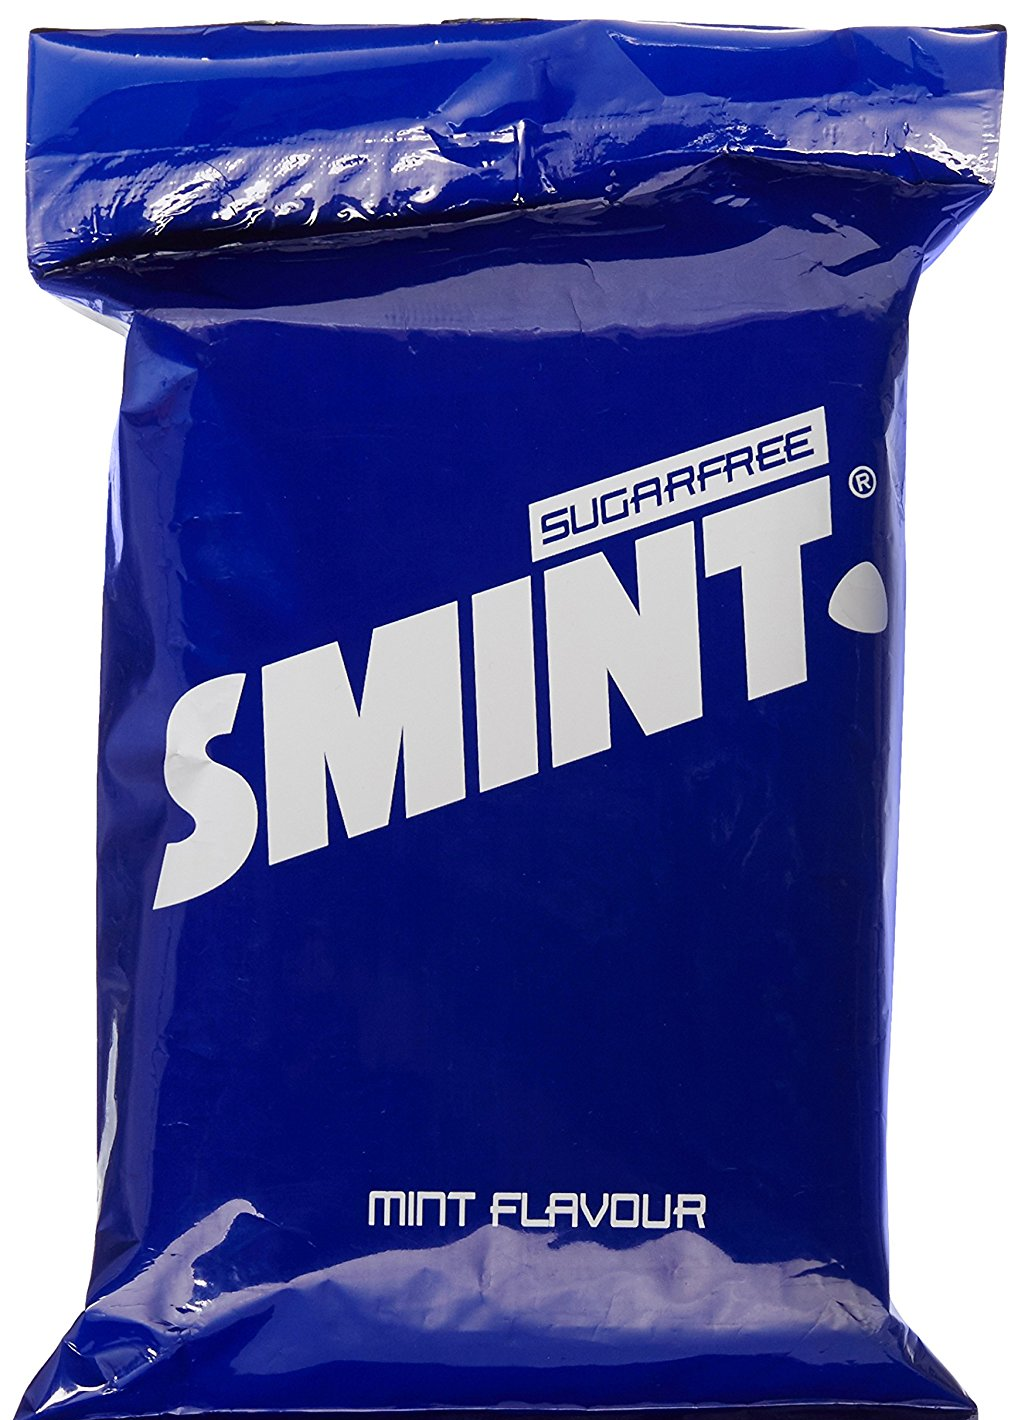 (Hurry) Amazon - Buy Smint Sugar Free Mint Flavour, 6.4g (8 Pieces) for just Rs.50